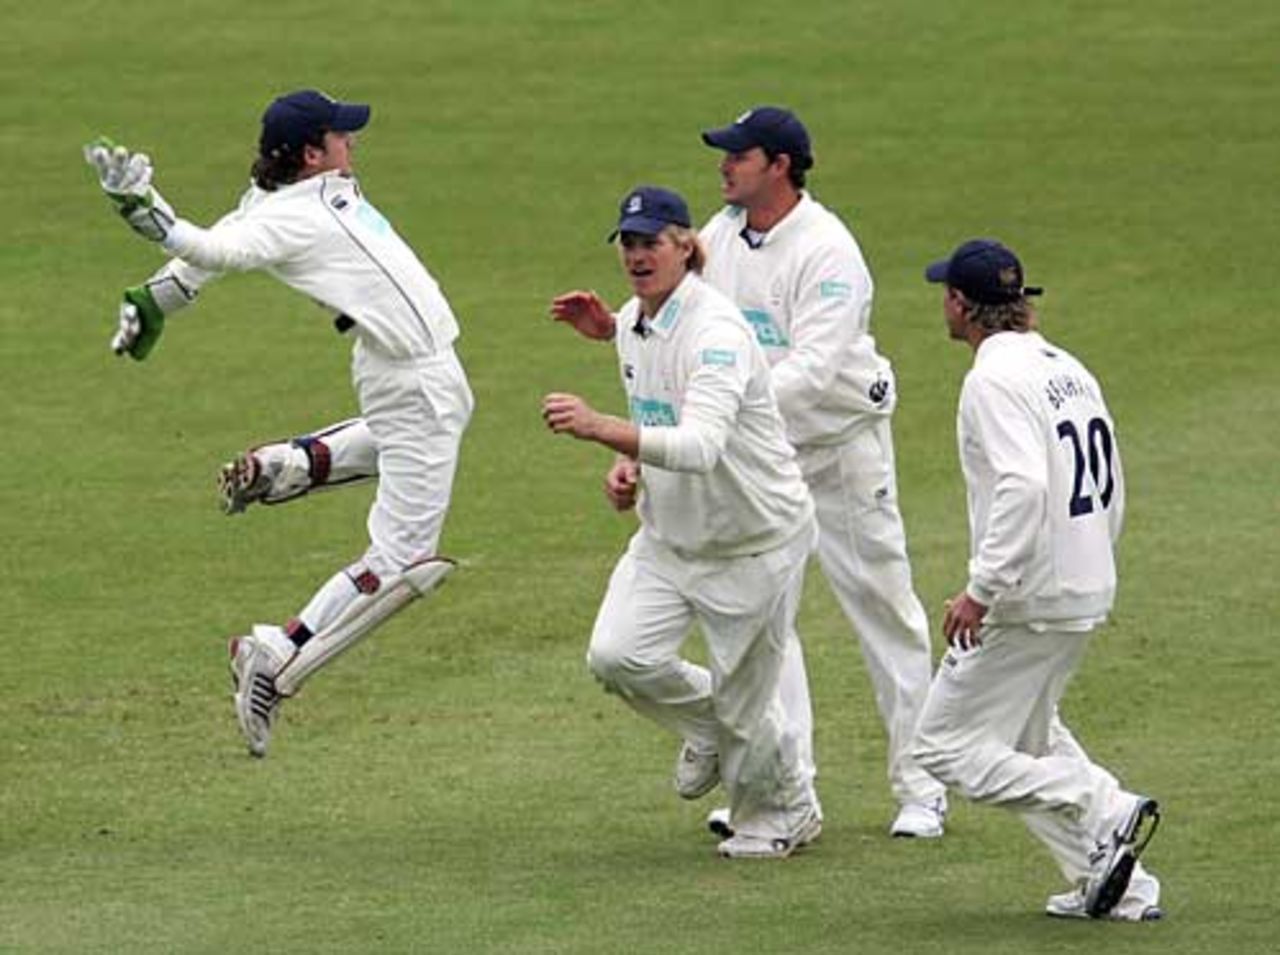 Tim Burrows shows his joy after catch Usman Afzaal, Hampshire v Surrey, County Championship, The Rose Bowl, May 16, 2008